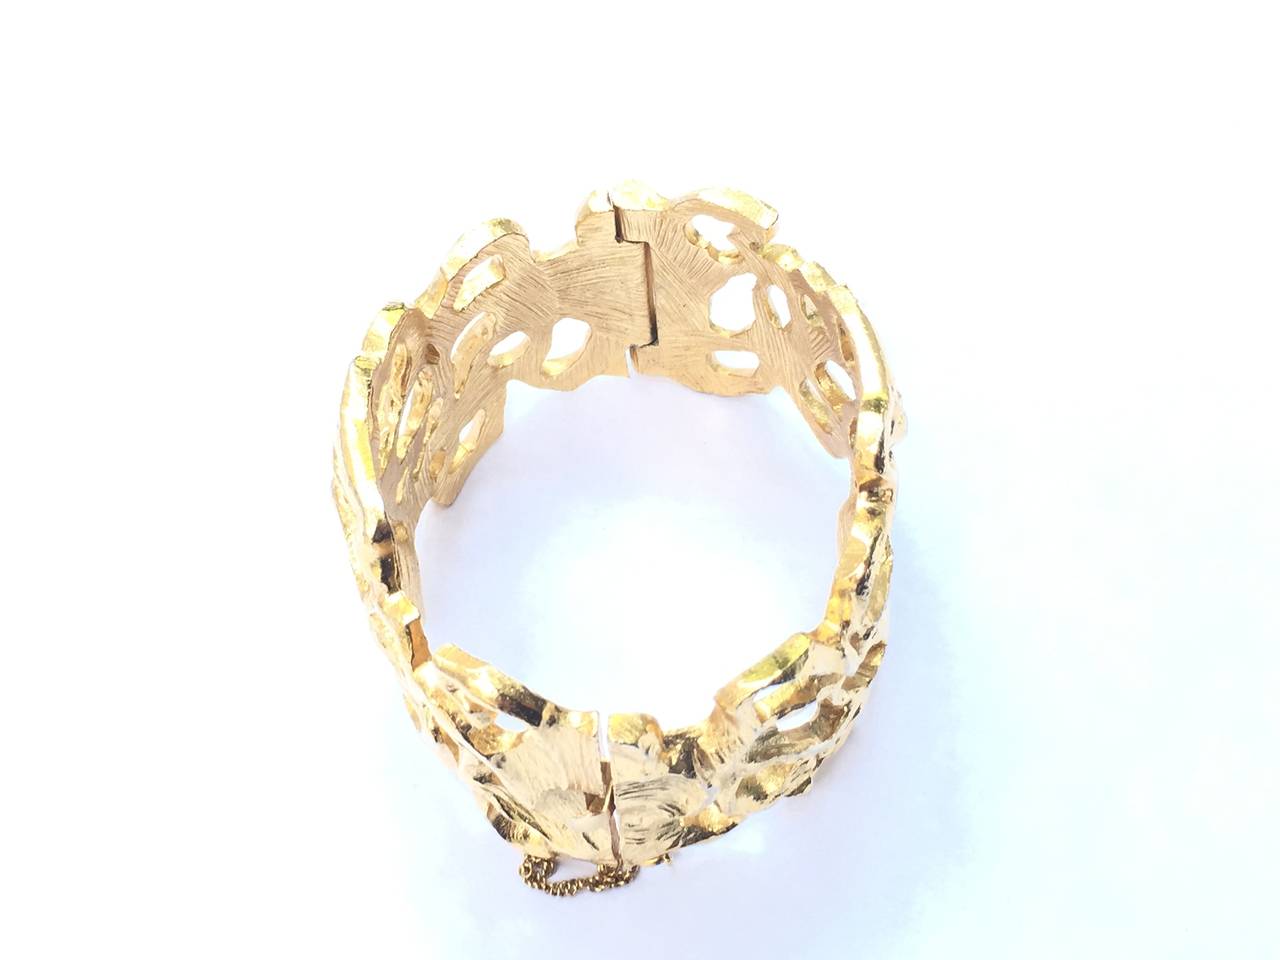 Jonathan Bailey for Trifari 1970s Sculpturesque modernist gold bracelet with chain clasp. 
Jonathan manufactured unique high-end 14k and 18k showpieces, for private clients and jewelry stores, in the 60’s and the 70’s. An affordable alternative to